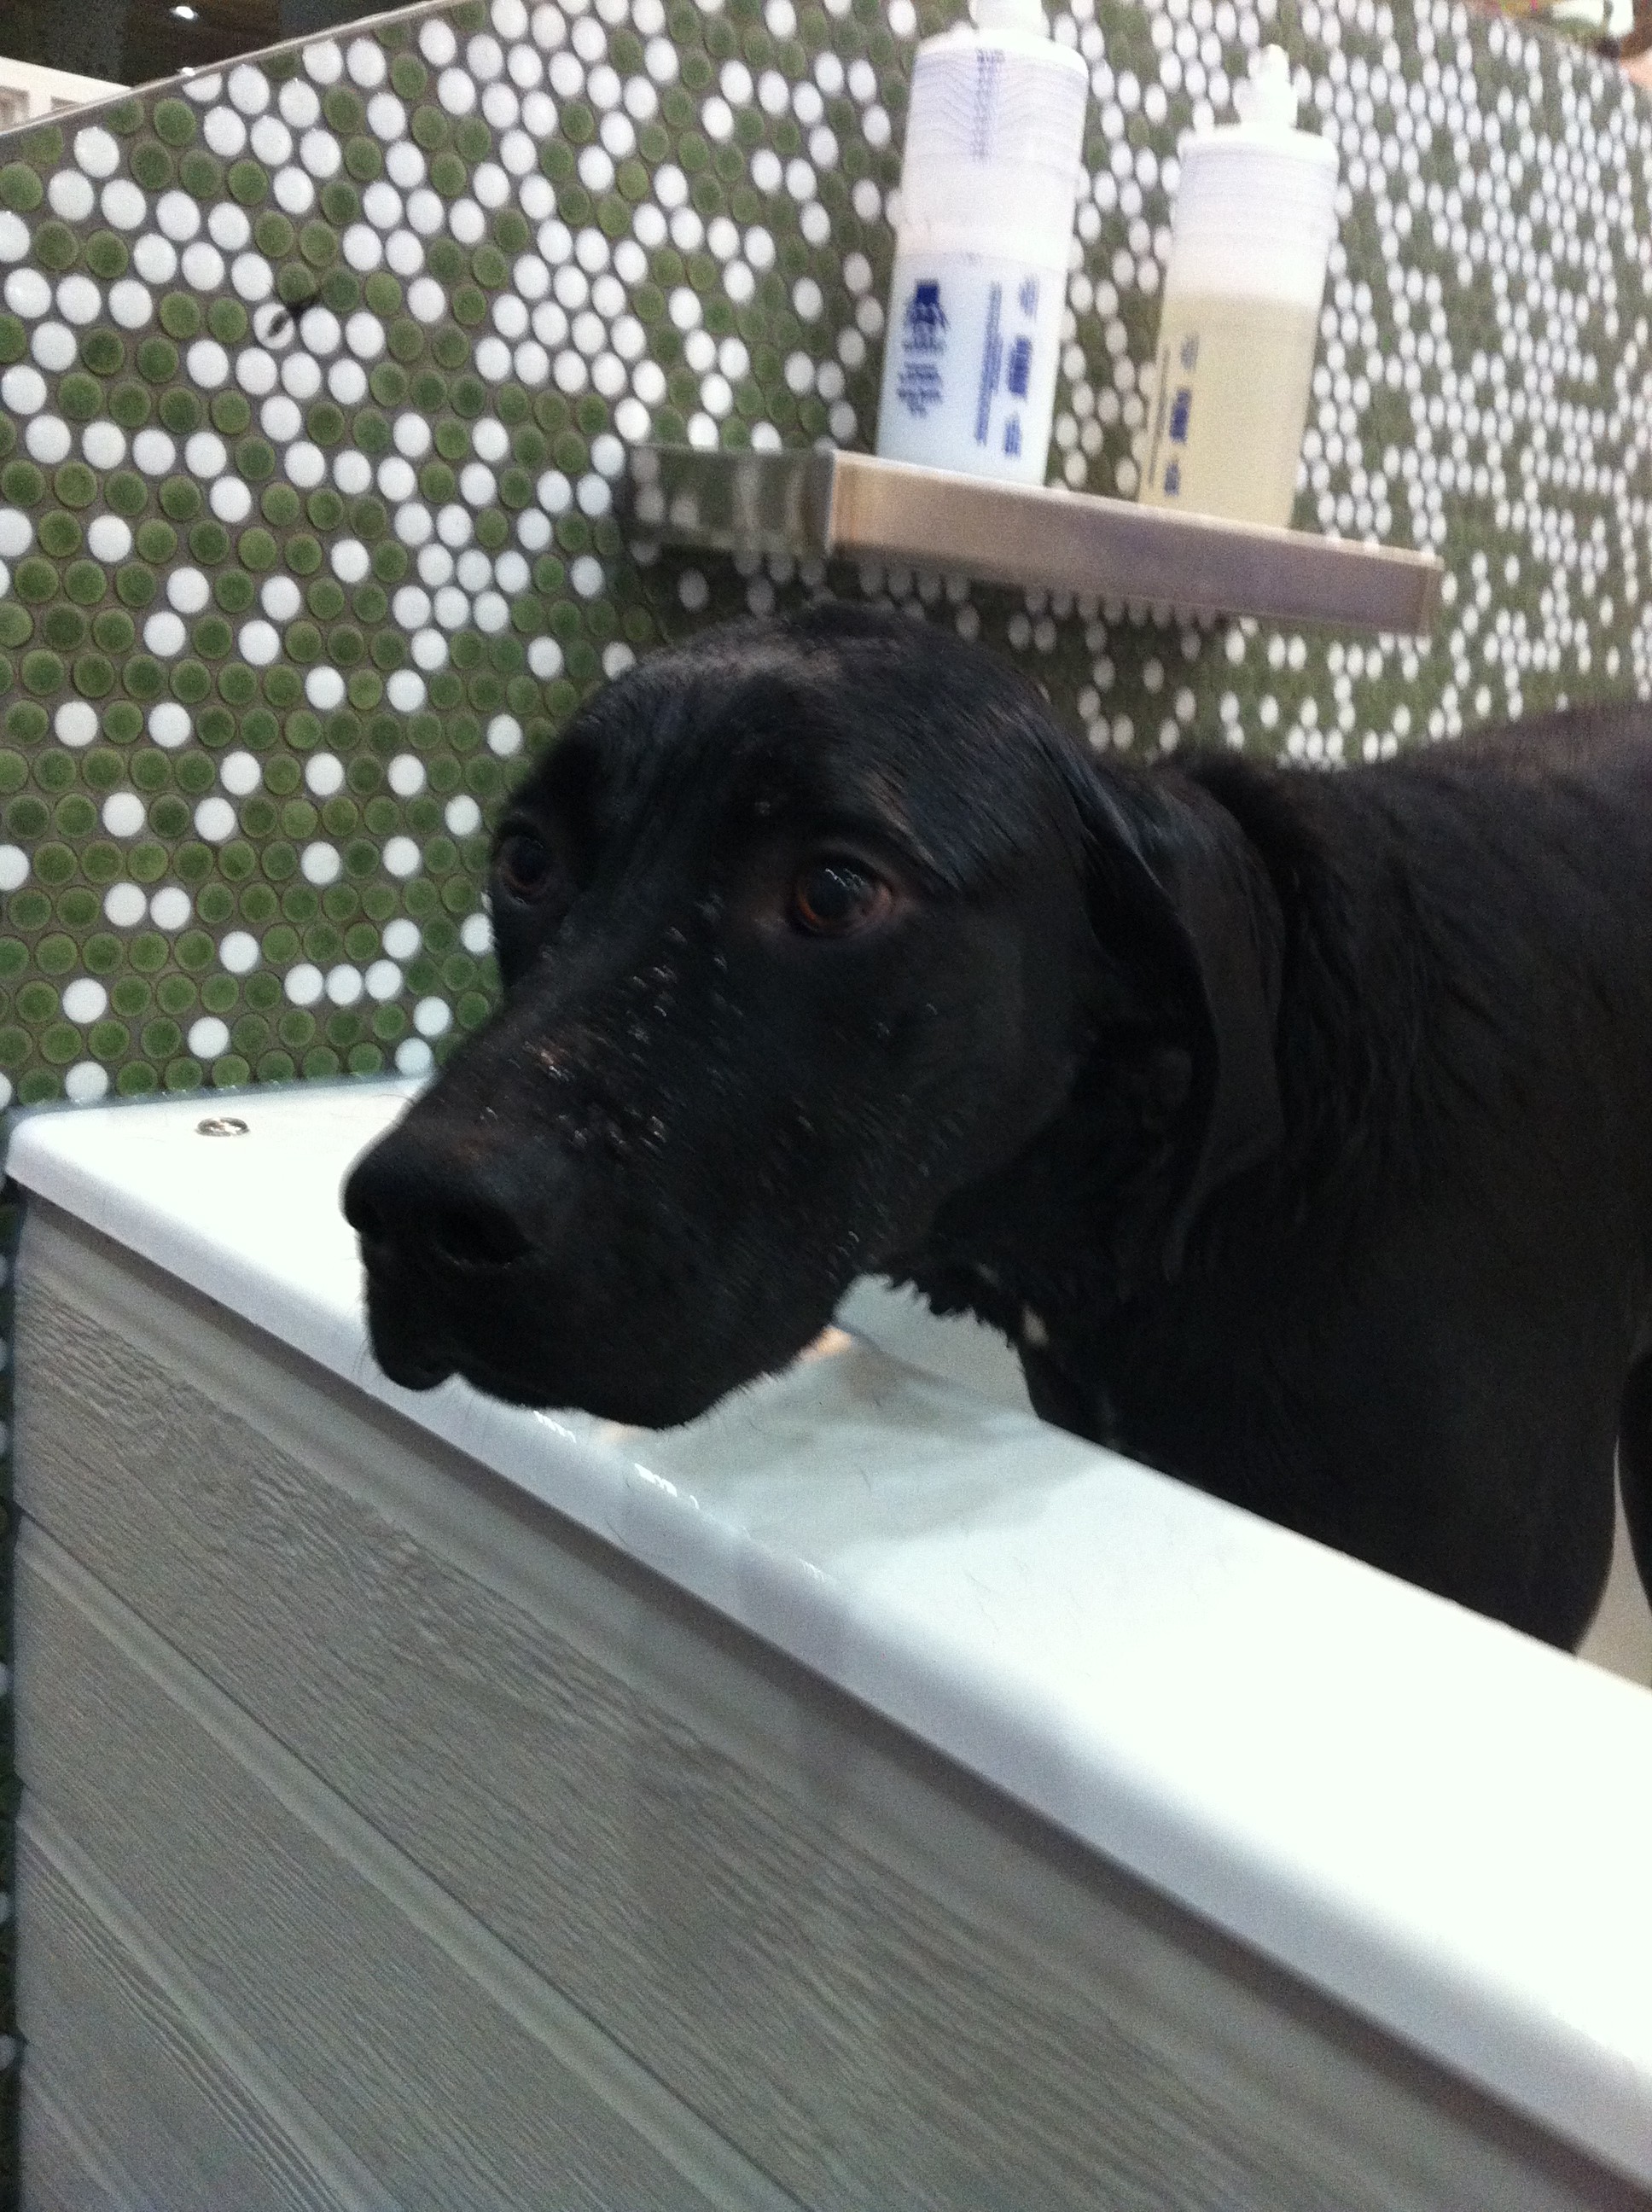 Missy the black lab at the dog wash